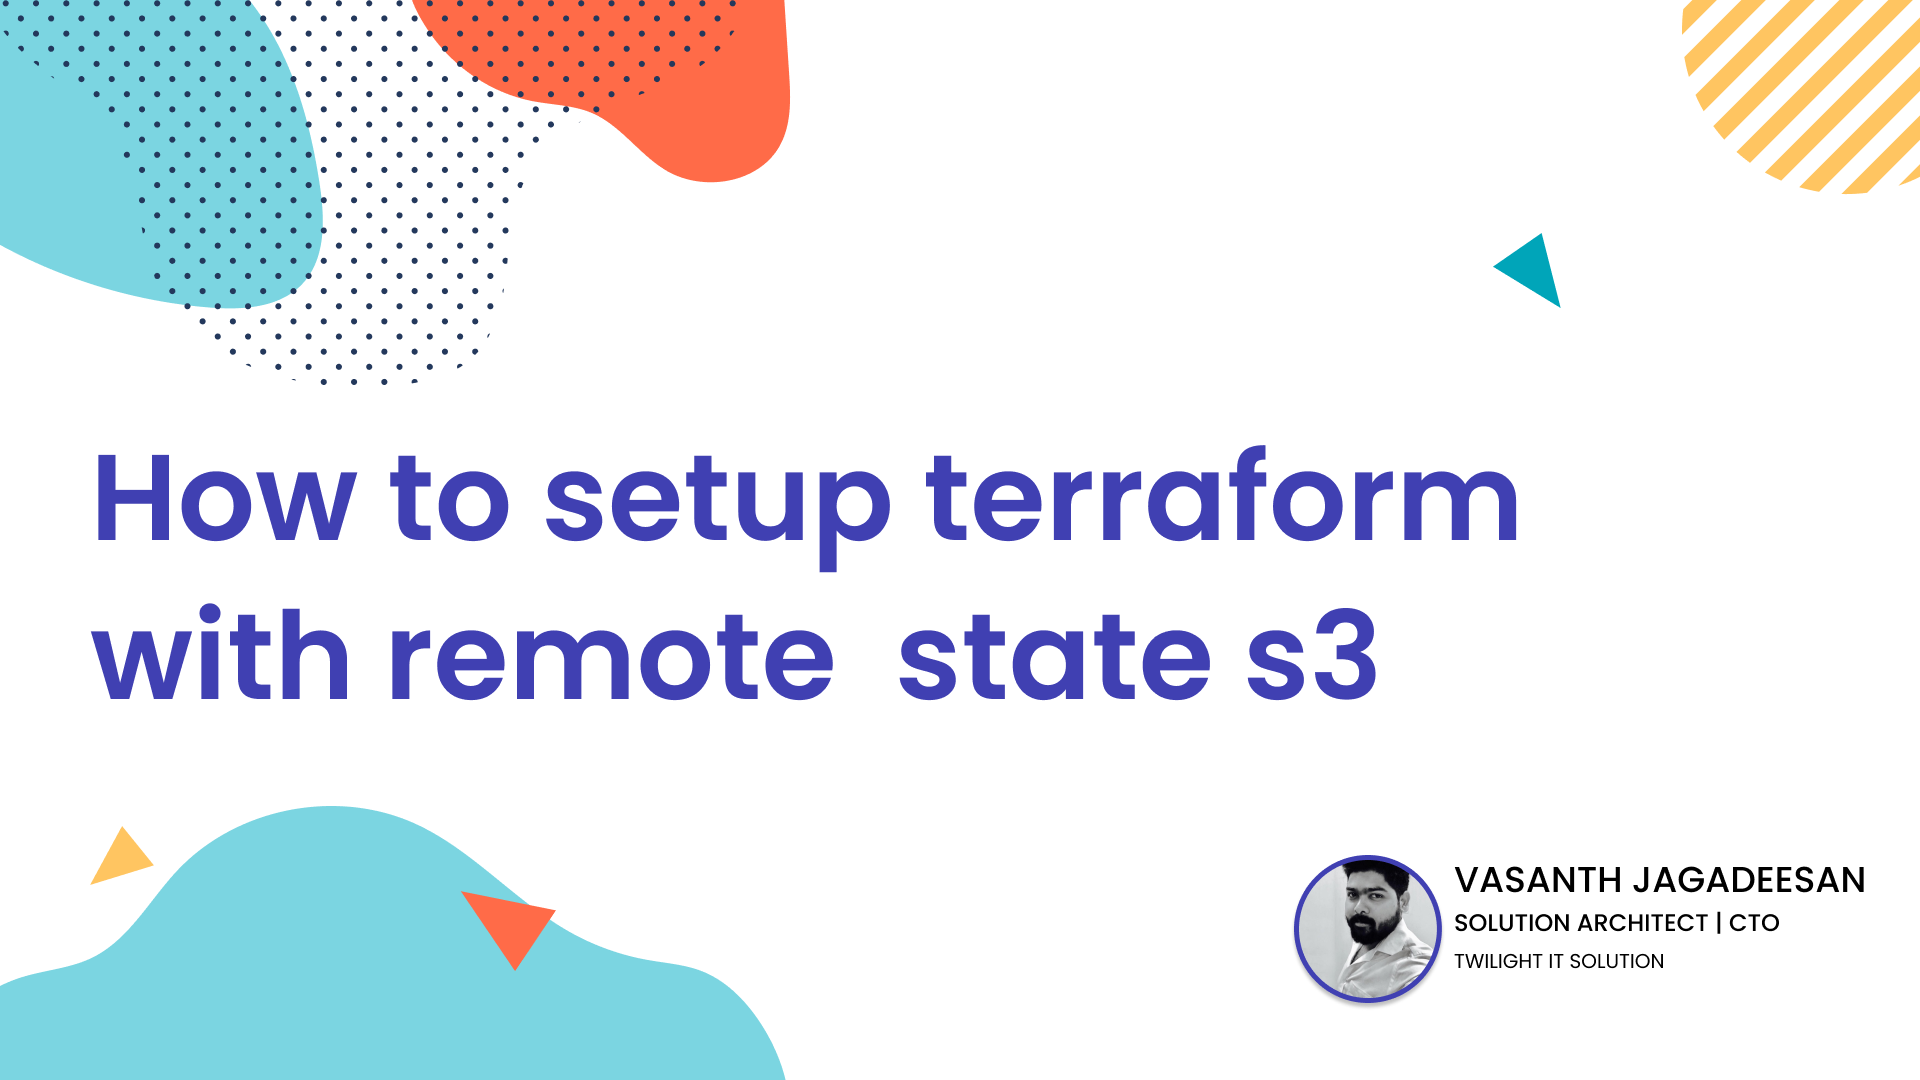 How to setup terraform with remote state S3